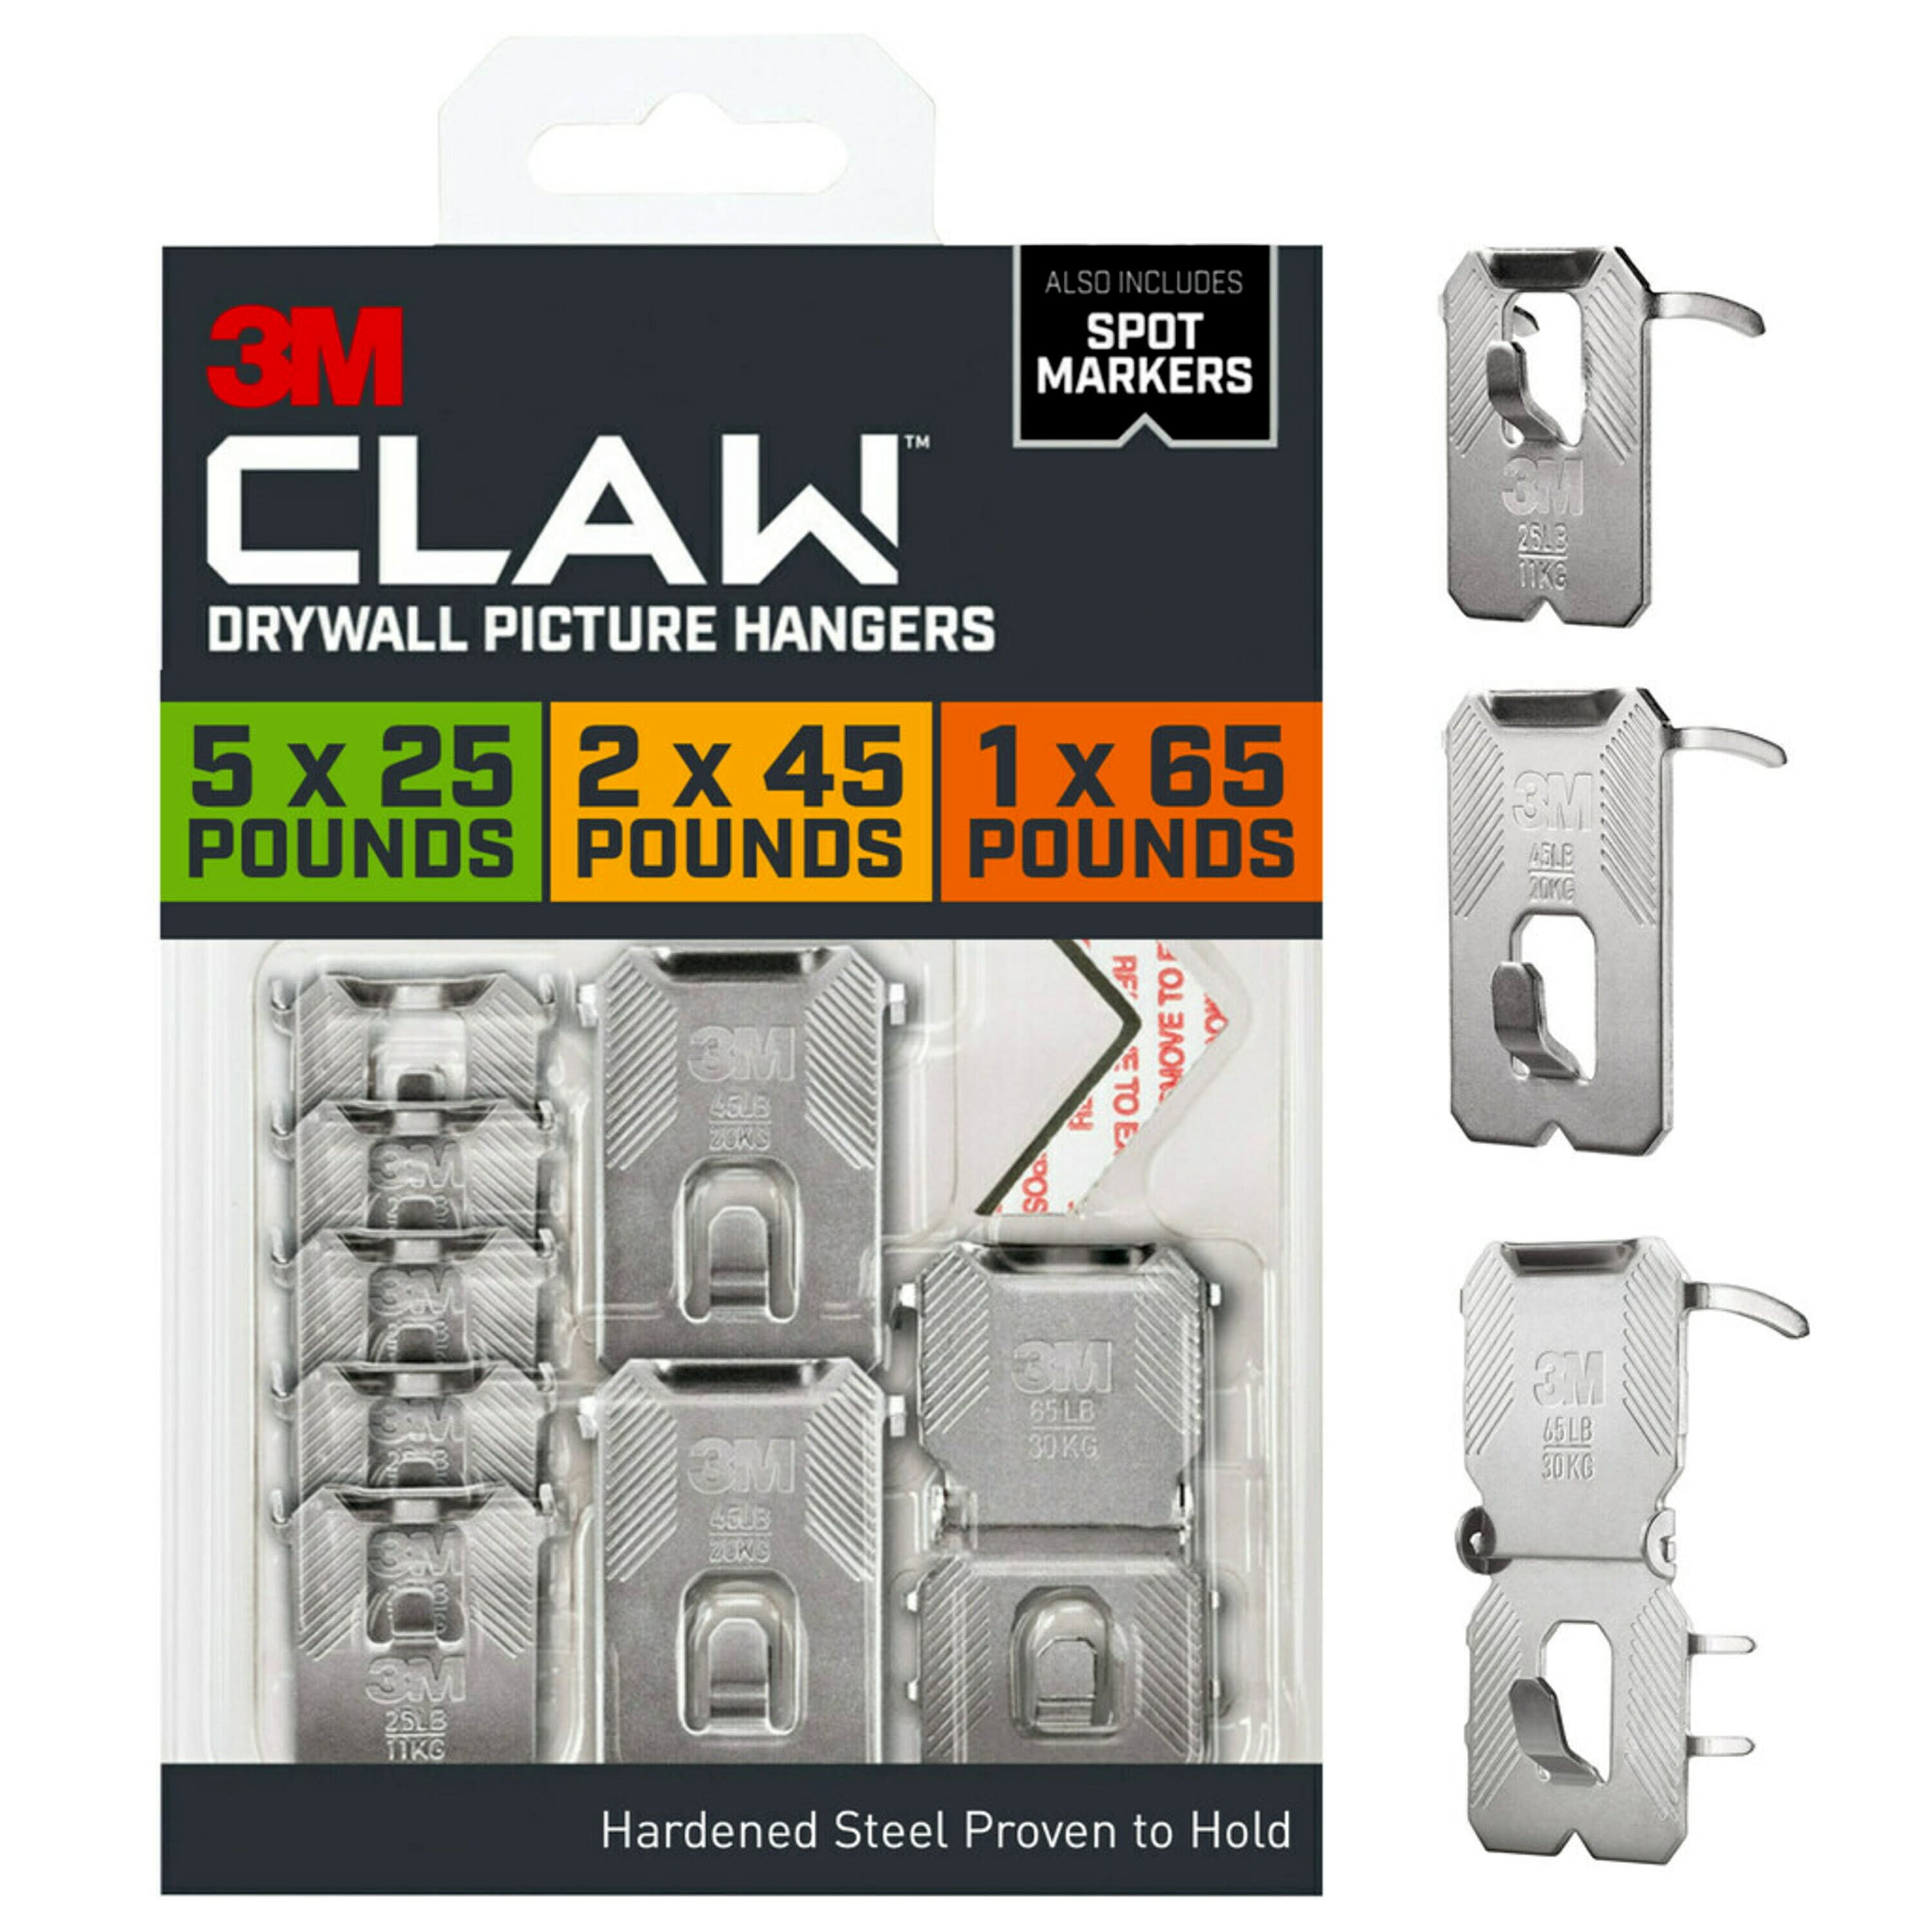 Adhesive Hooks and Hangers, 3M Innovation